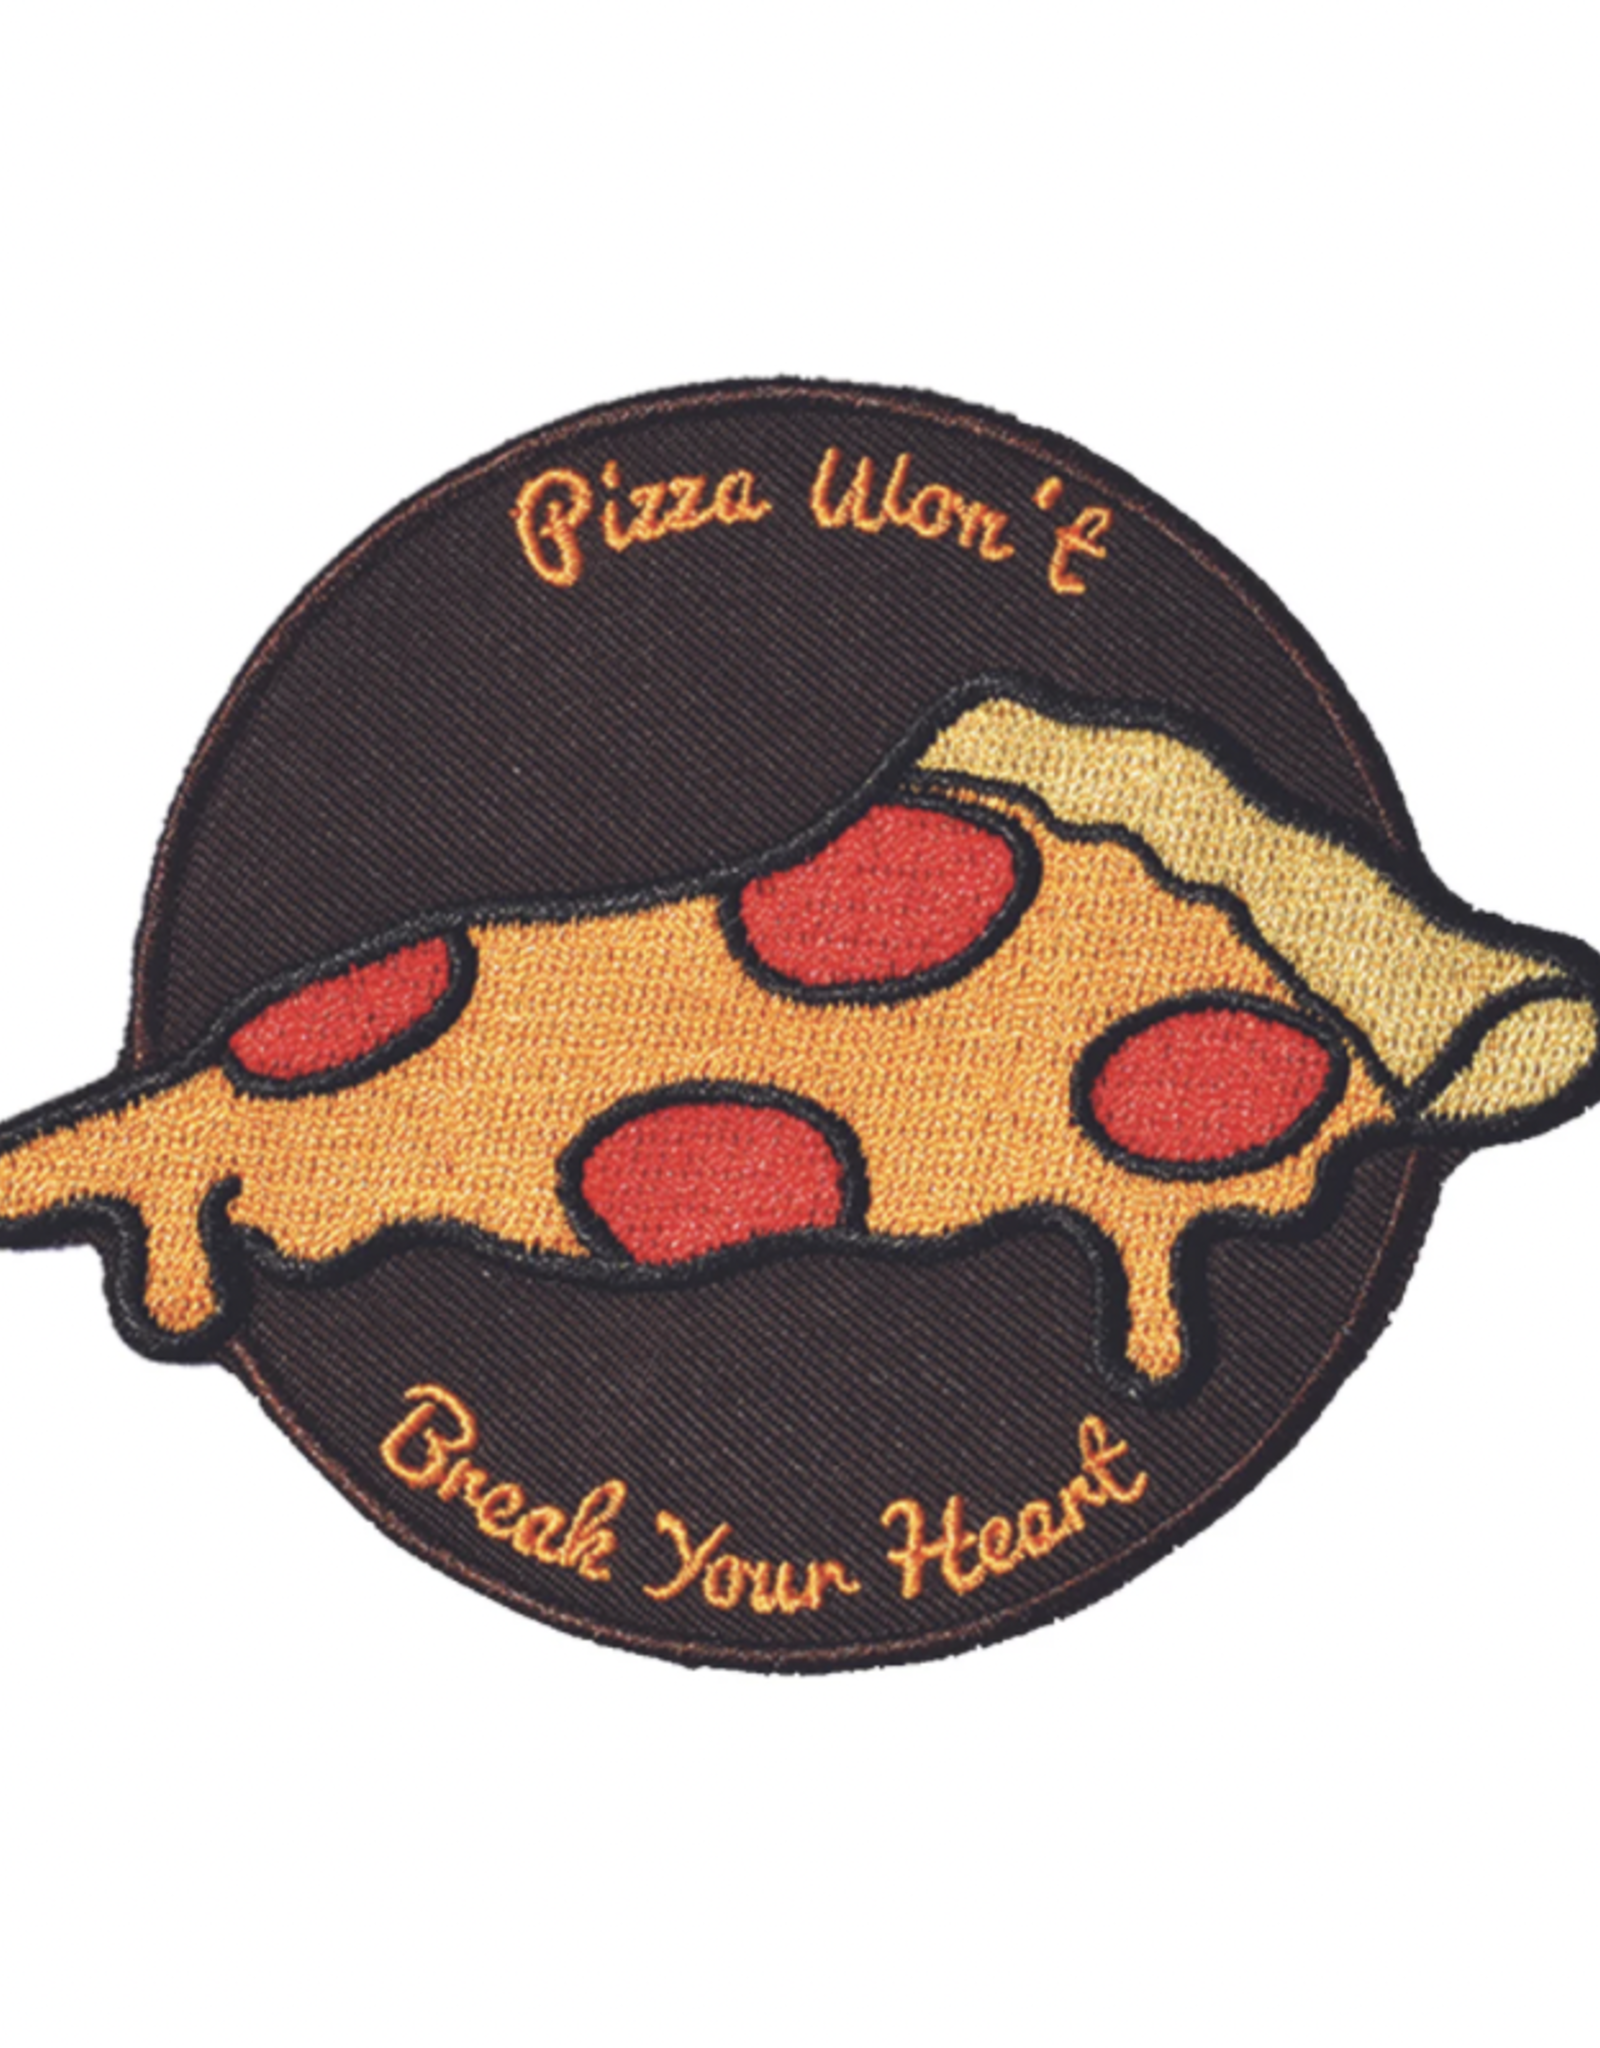 Pizza Won't Break Your Heart Embroidered Patch by Retrograde Supply Co